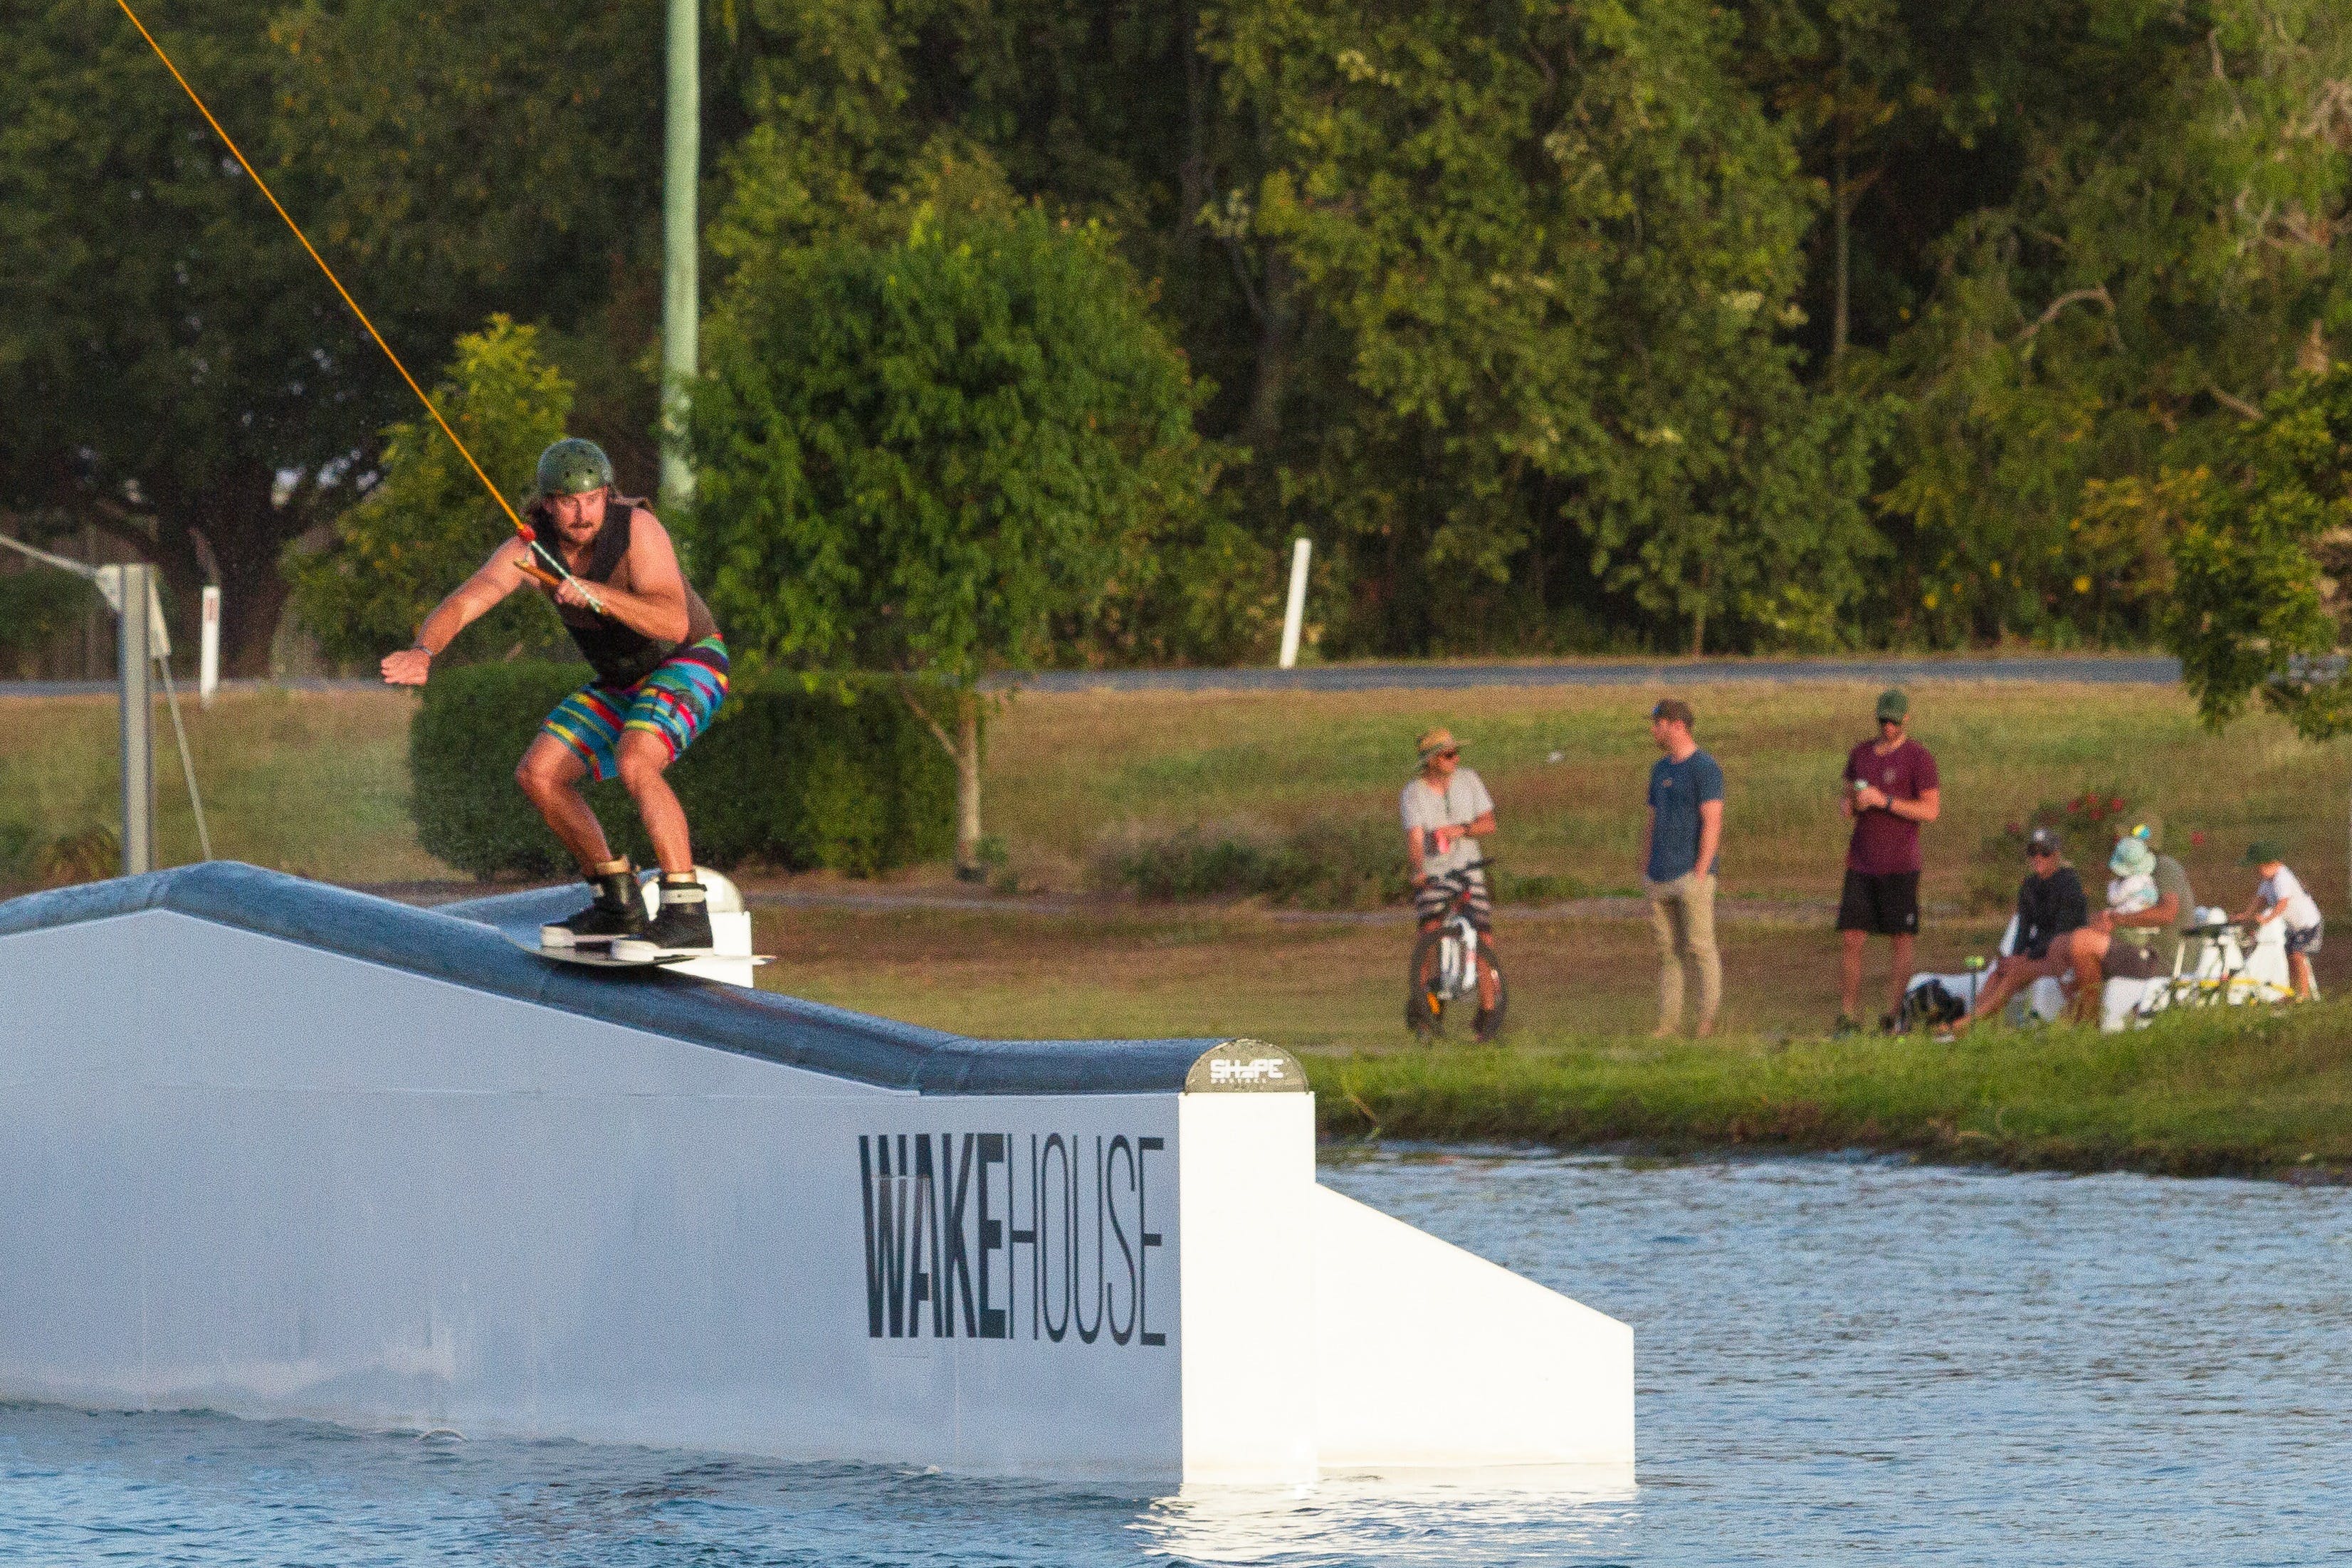 Cash for Tricks - Wakeboarding Comp - Townsville Tourism